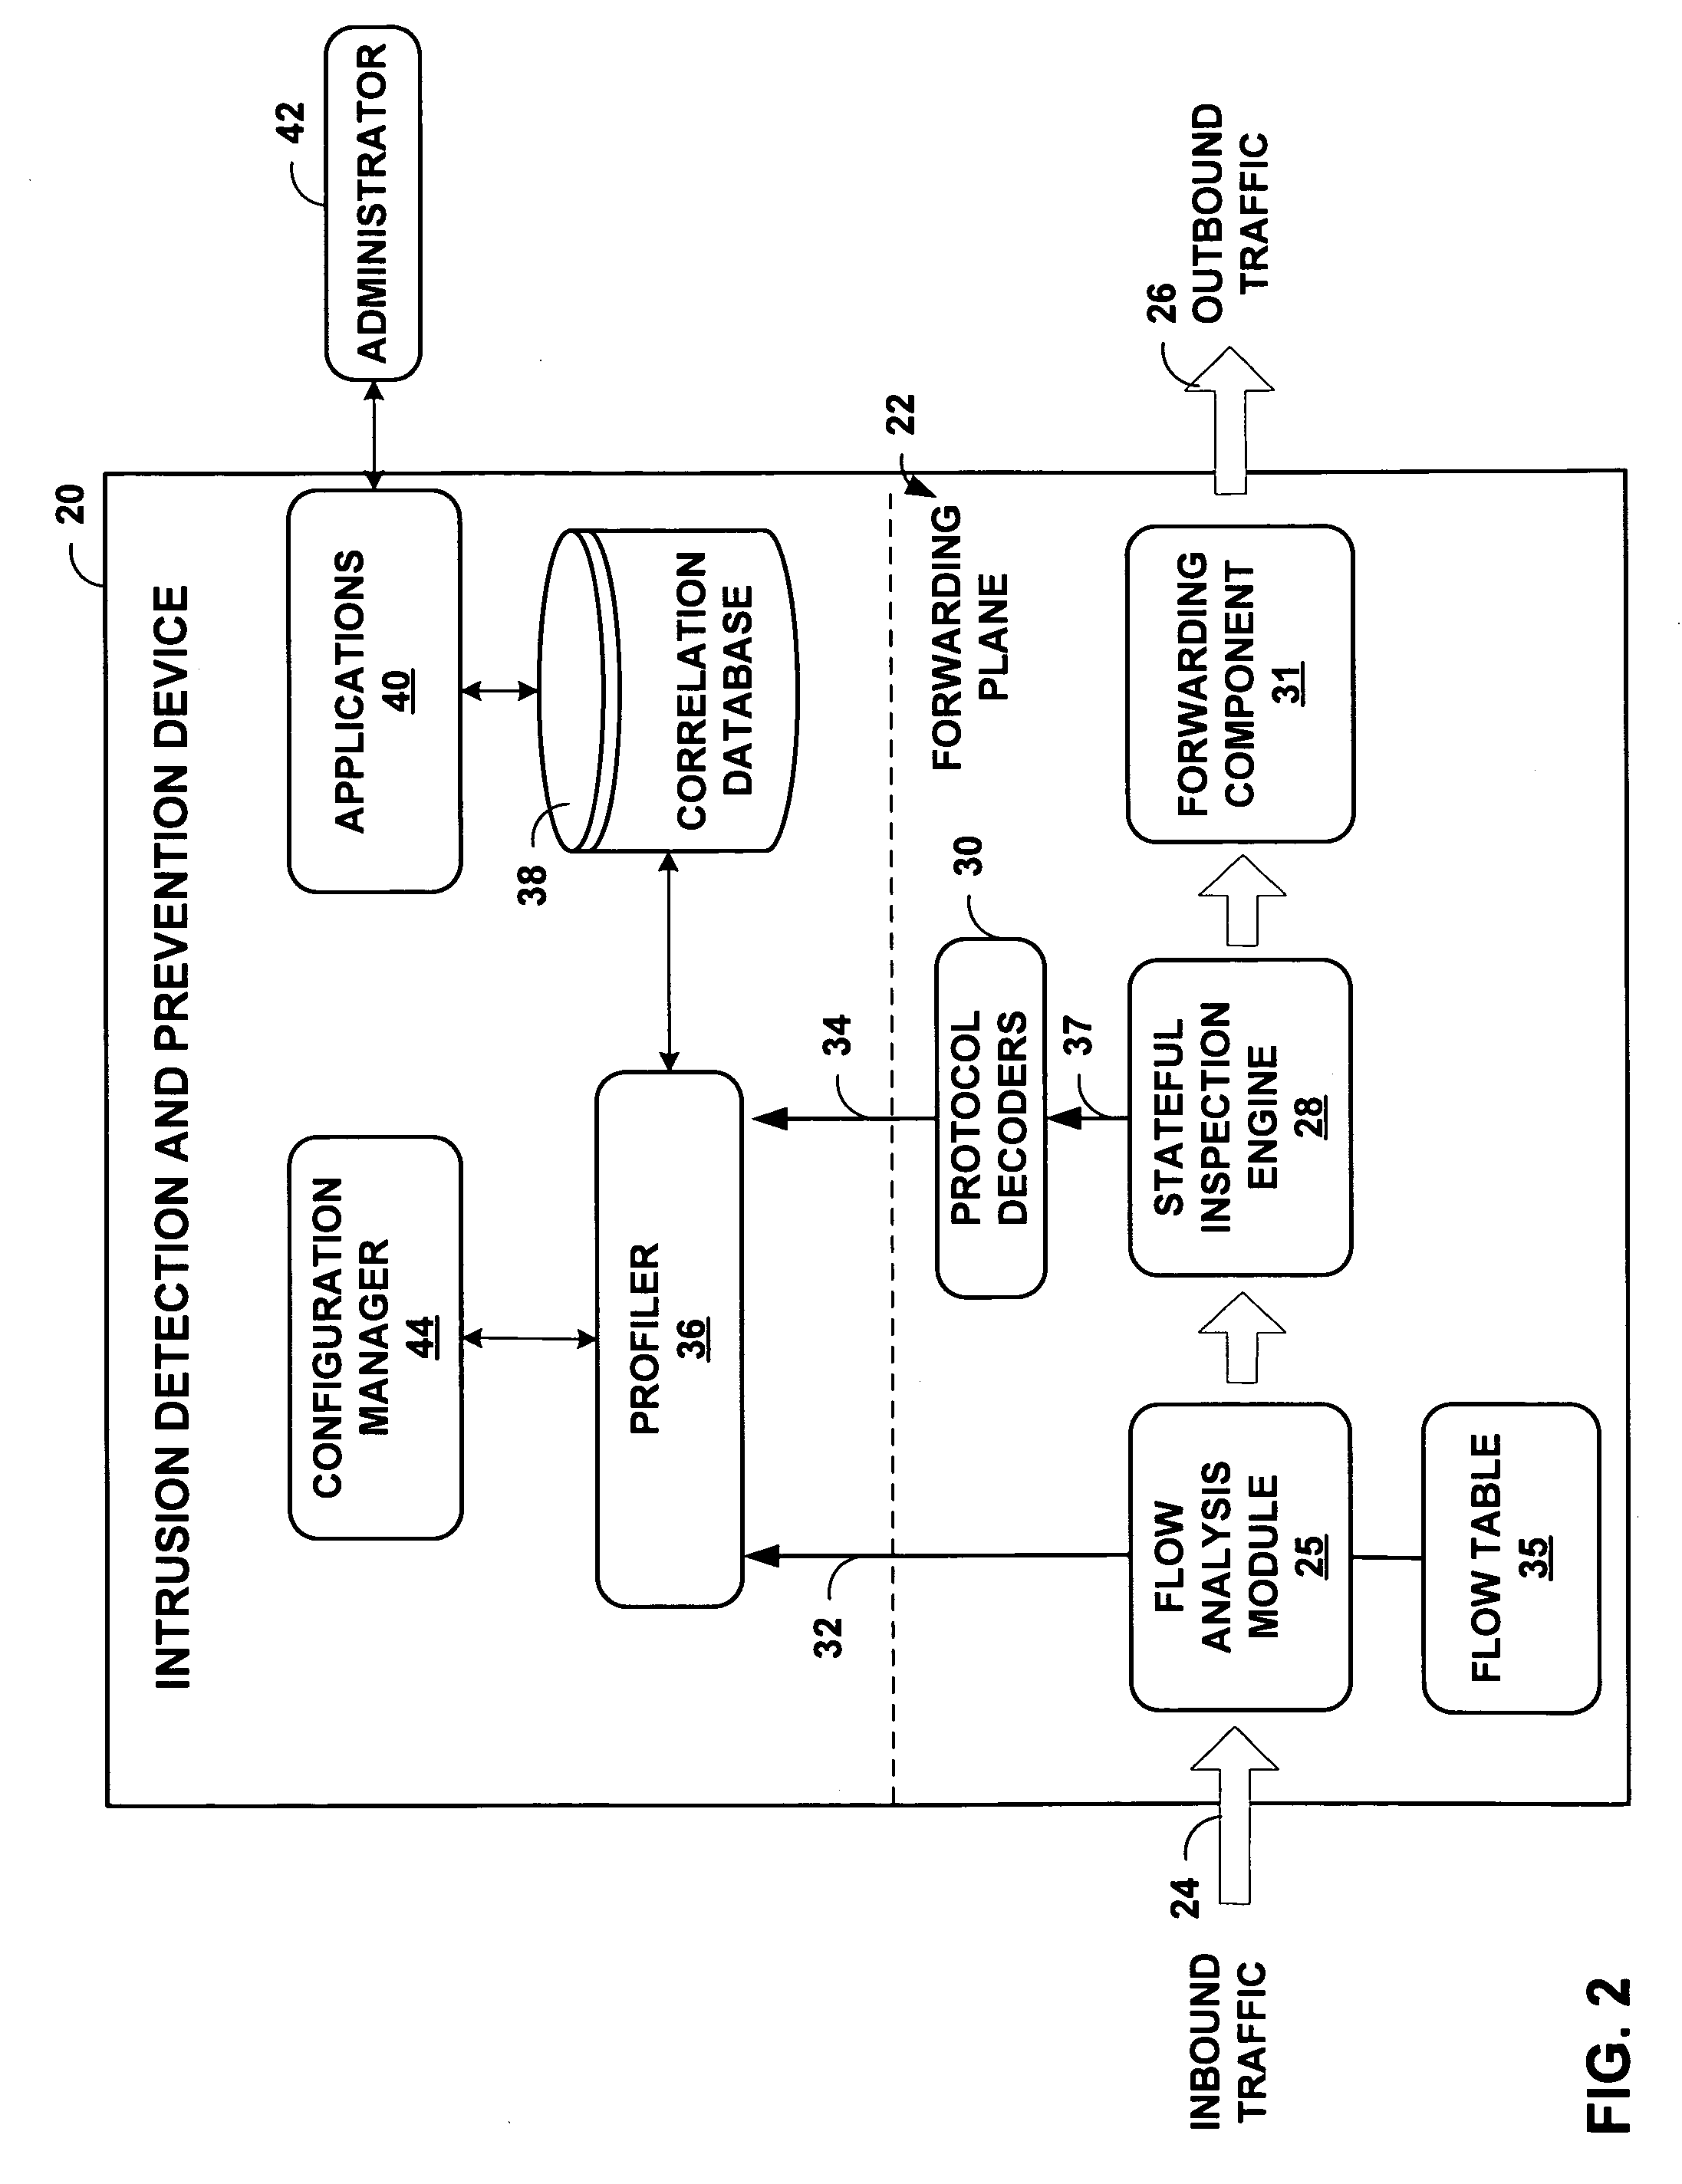 Application-layer monitoring and profiling network traffic